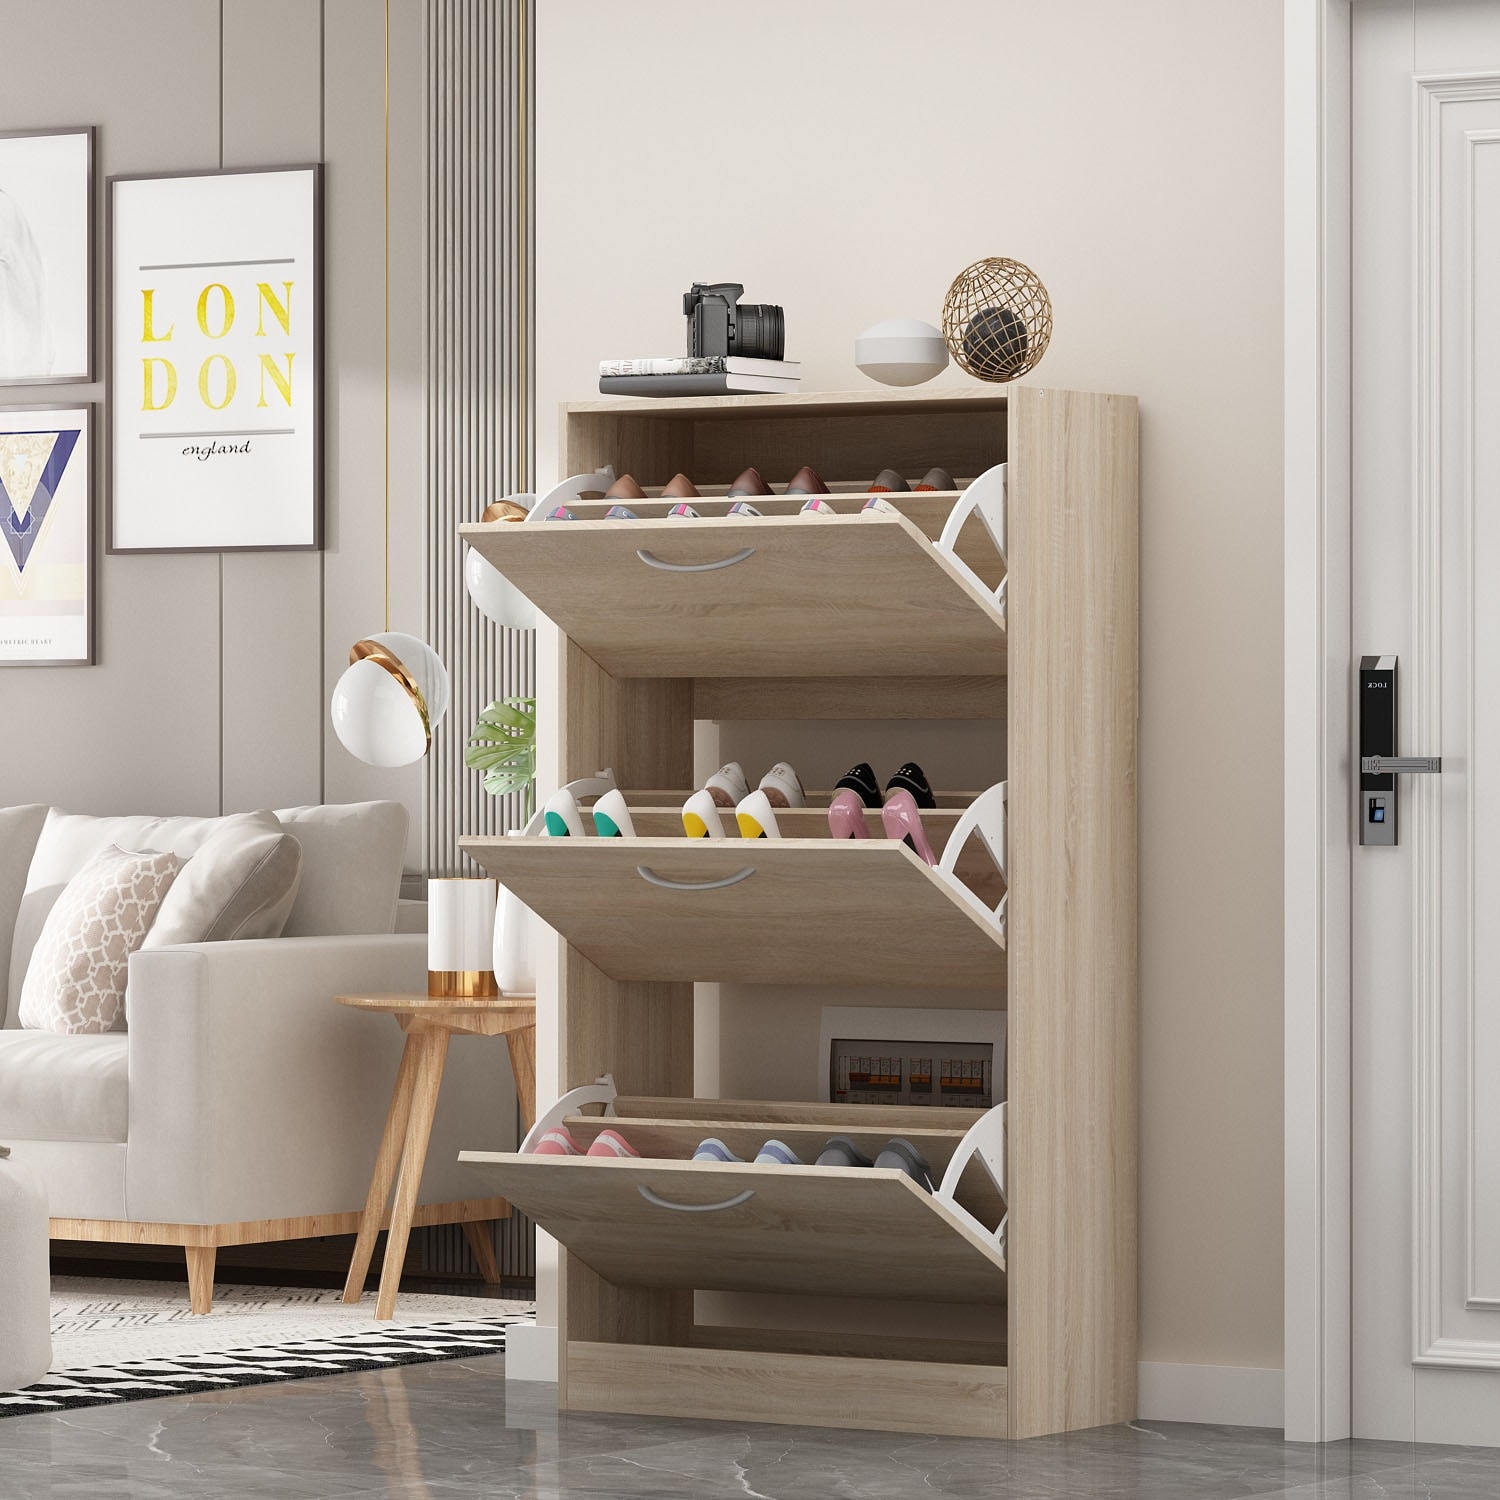 https://ak1.ostkcdn.com/images/products/is/images/direct/3b6bd244599cb22ab428e2da7e851c1568c411e1/Modern-Shoe-Storage-Cabinet-for-Entryway%2C-2-Tier-Floor-Shoes-Cabinet.jpg